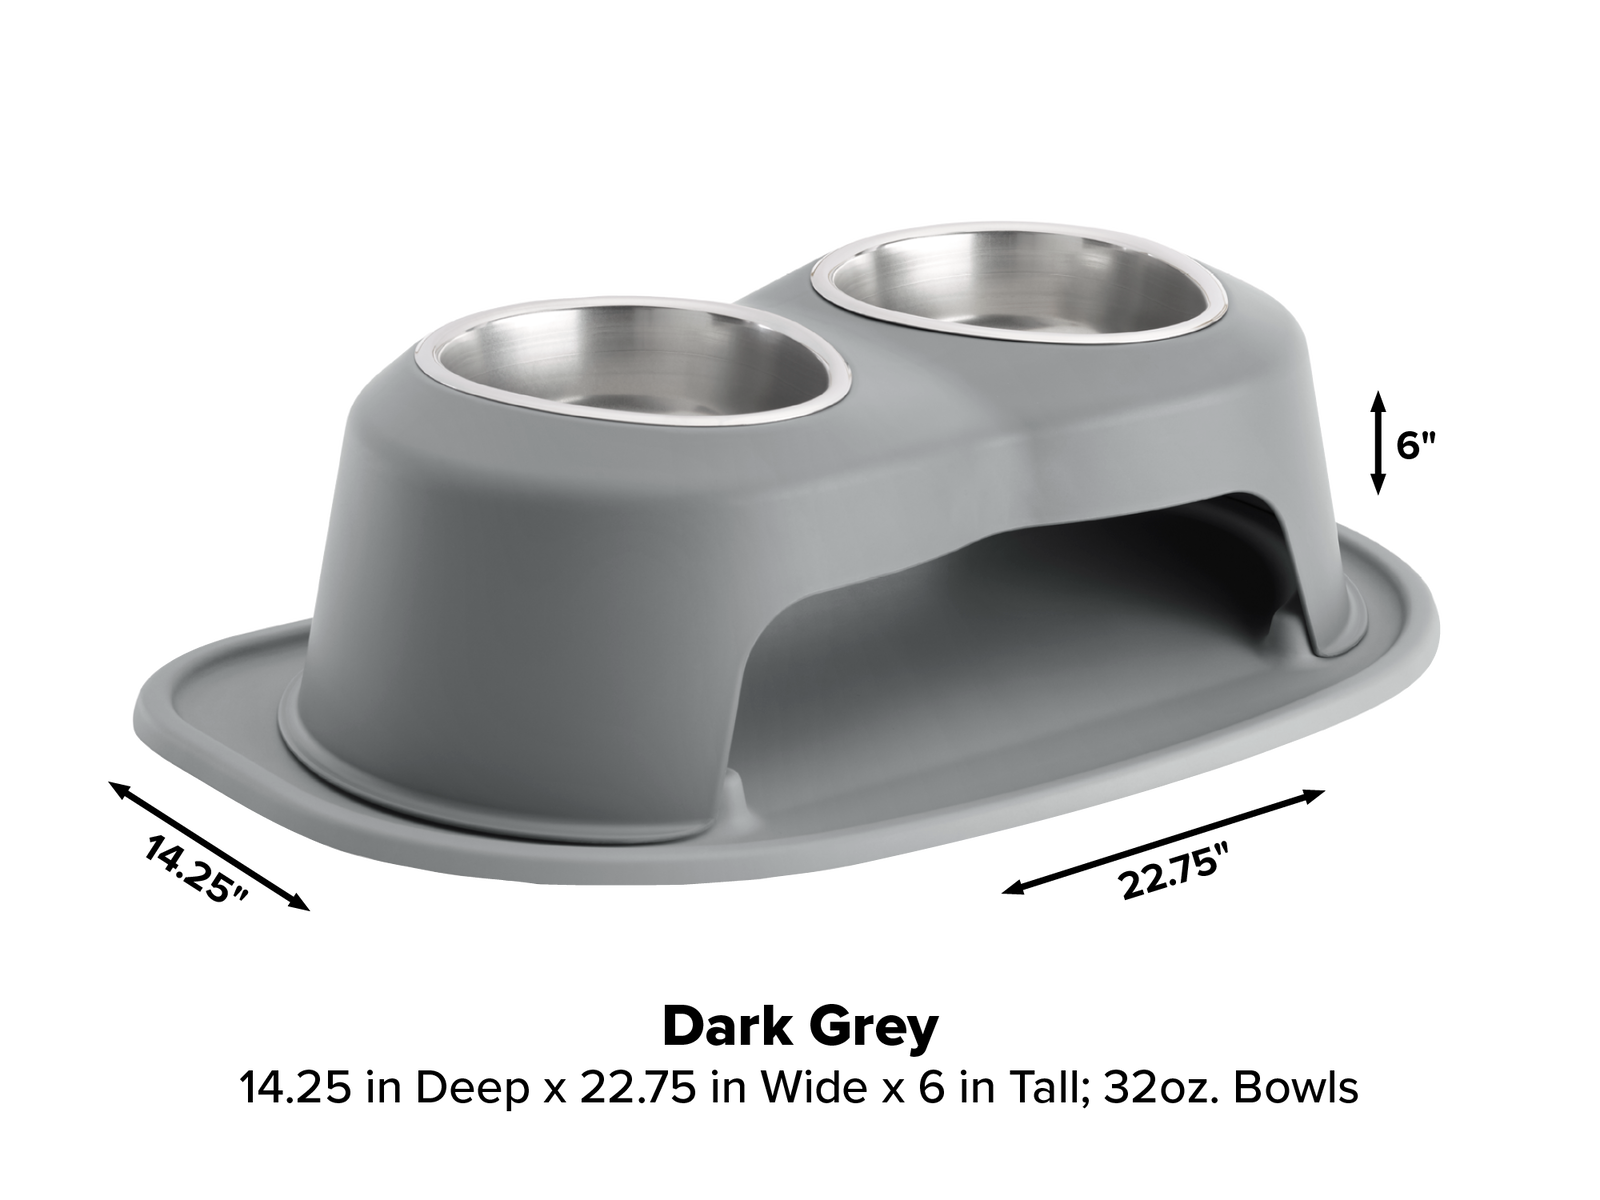 WeatherTech Pet Feeders & Water Fountains at Crutchfield